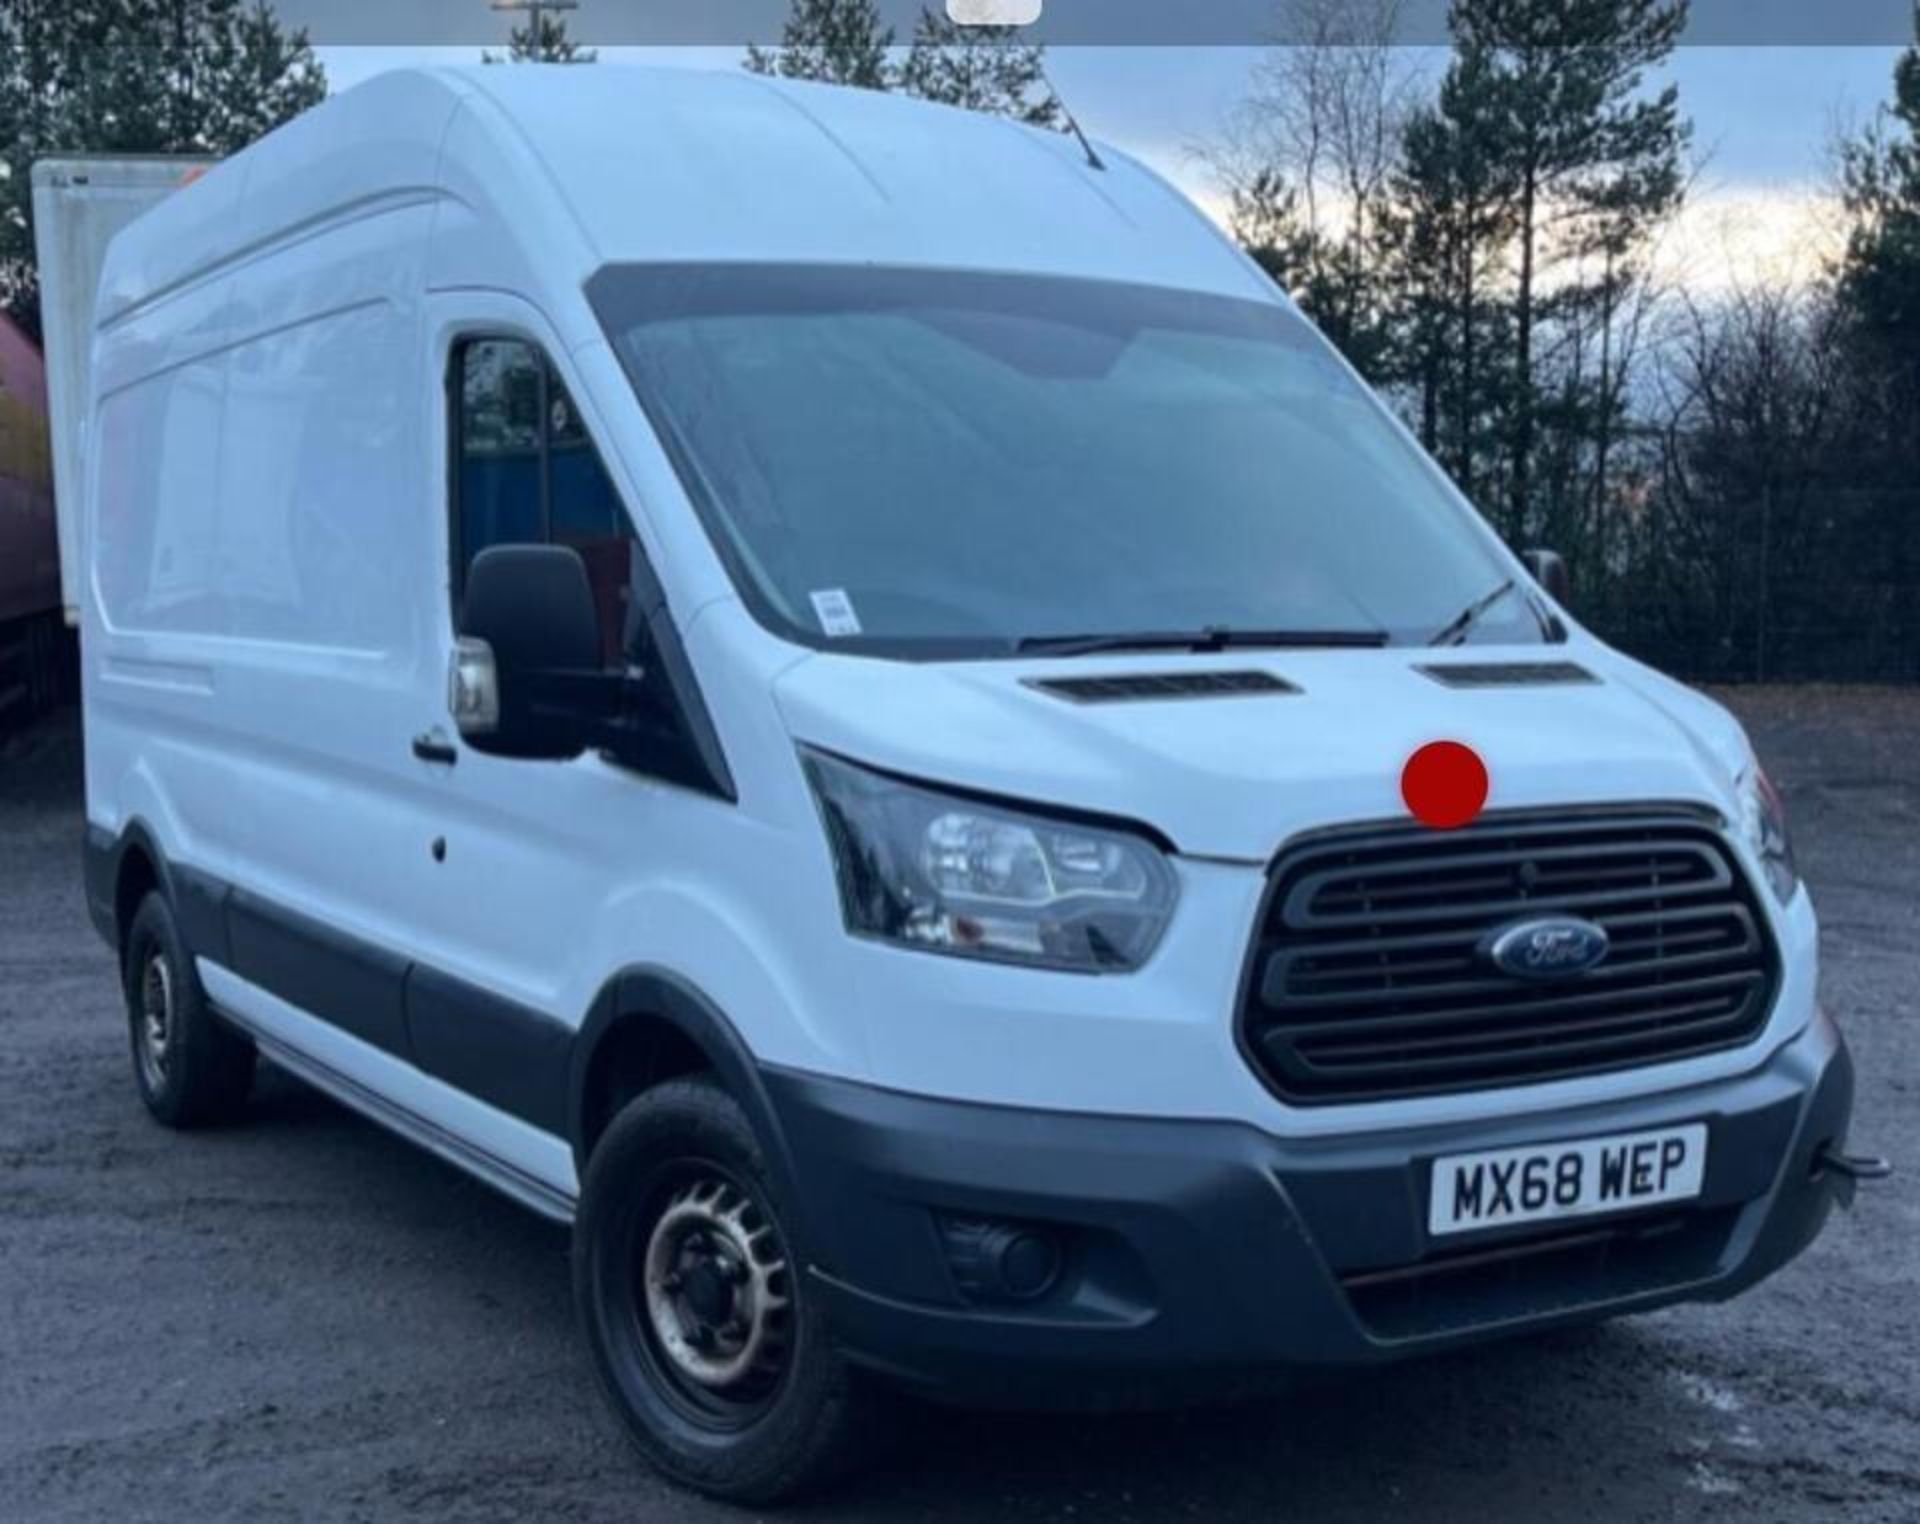 2018 FORD TRANSIT - 180K MILES - HPI CLEAR- READY FOR ACTION!